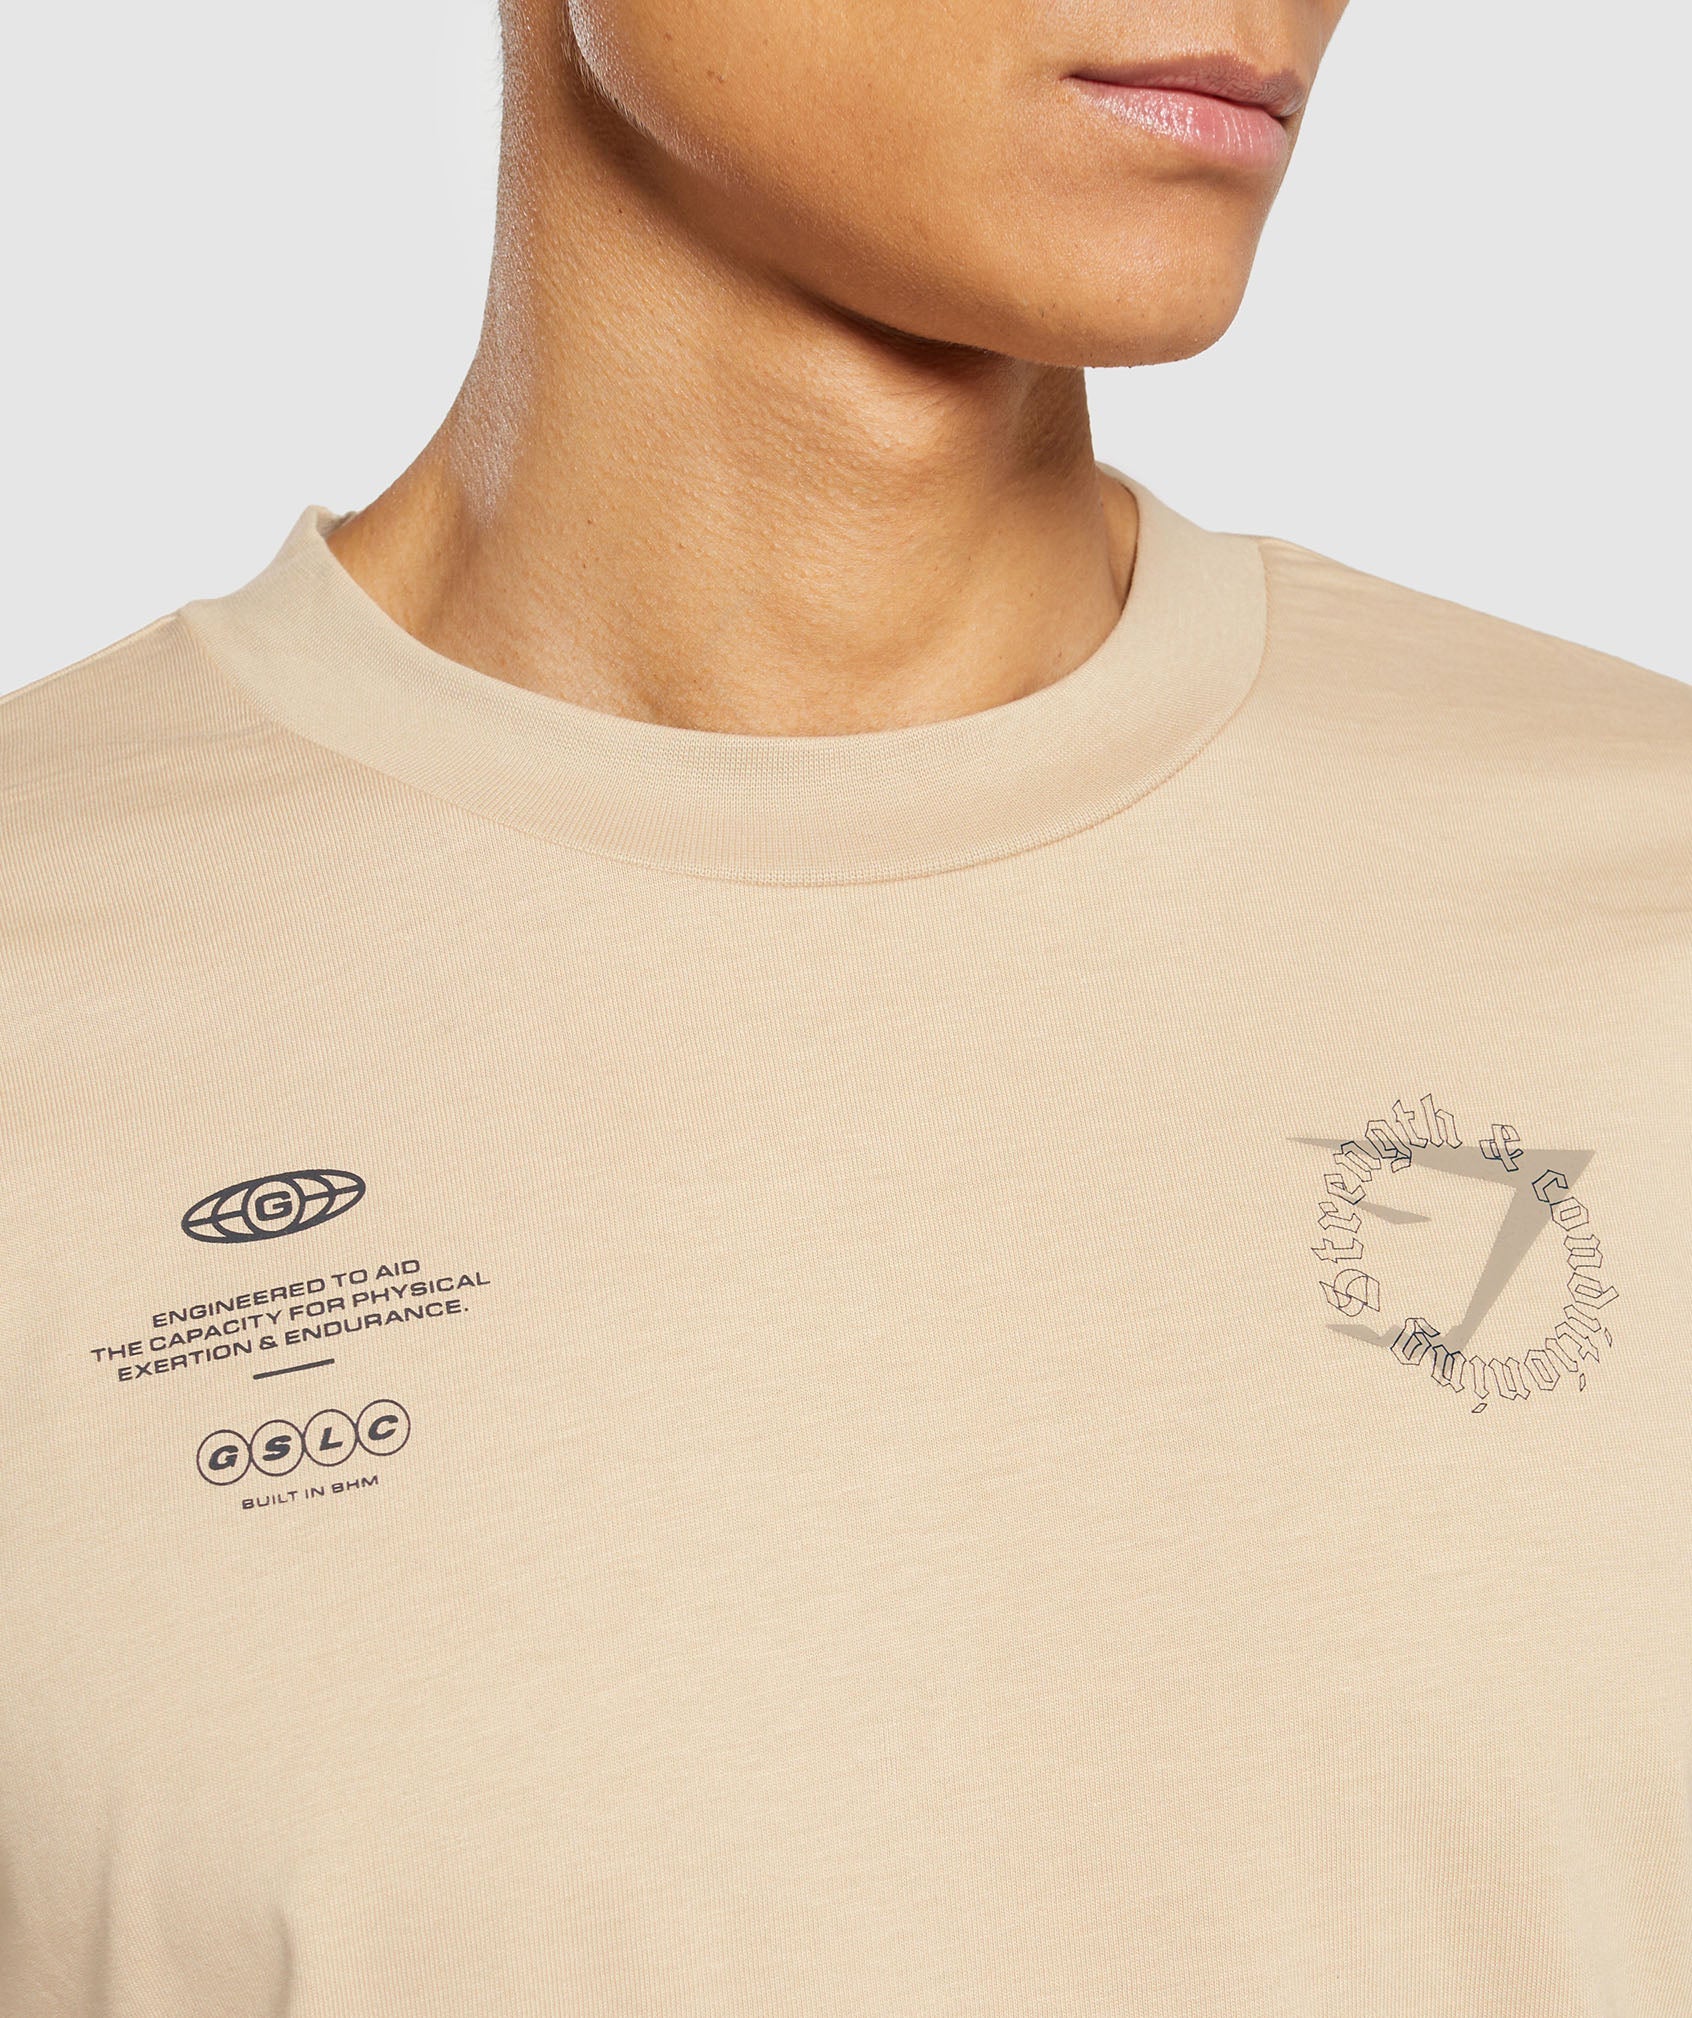 Strength and Conditioning T-Shirt in Vanilla Beige - view 6